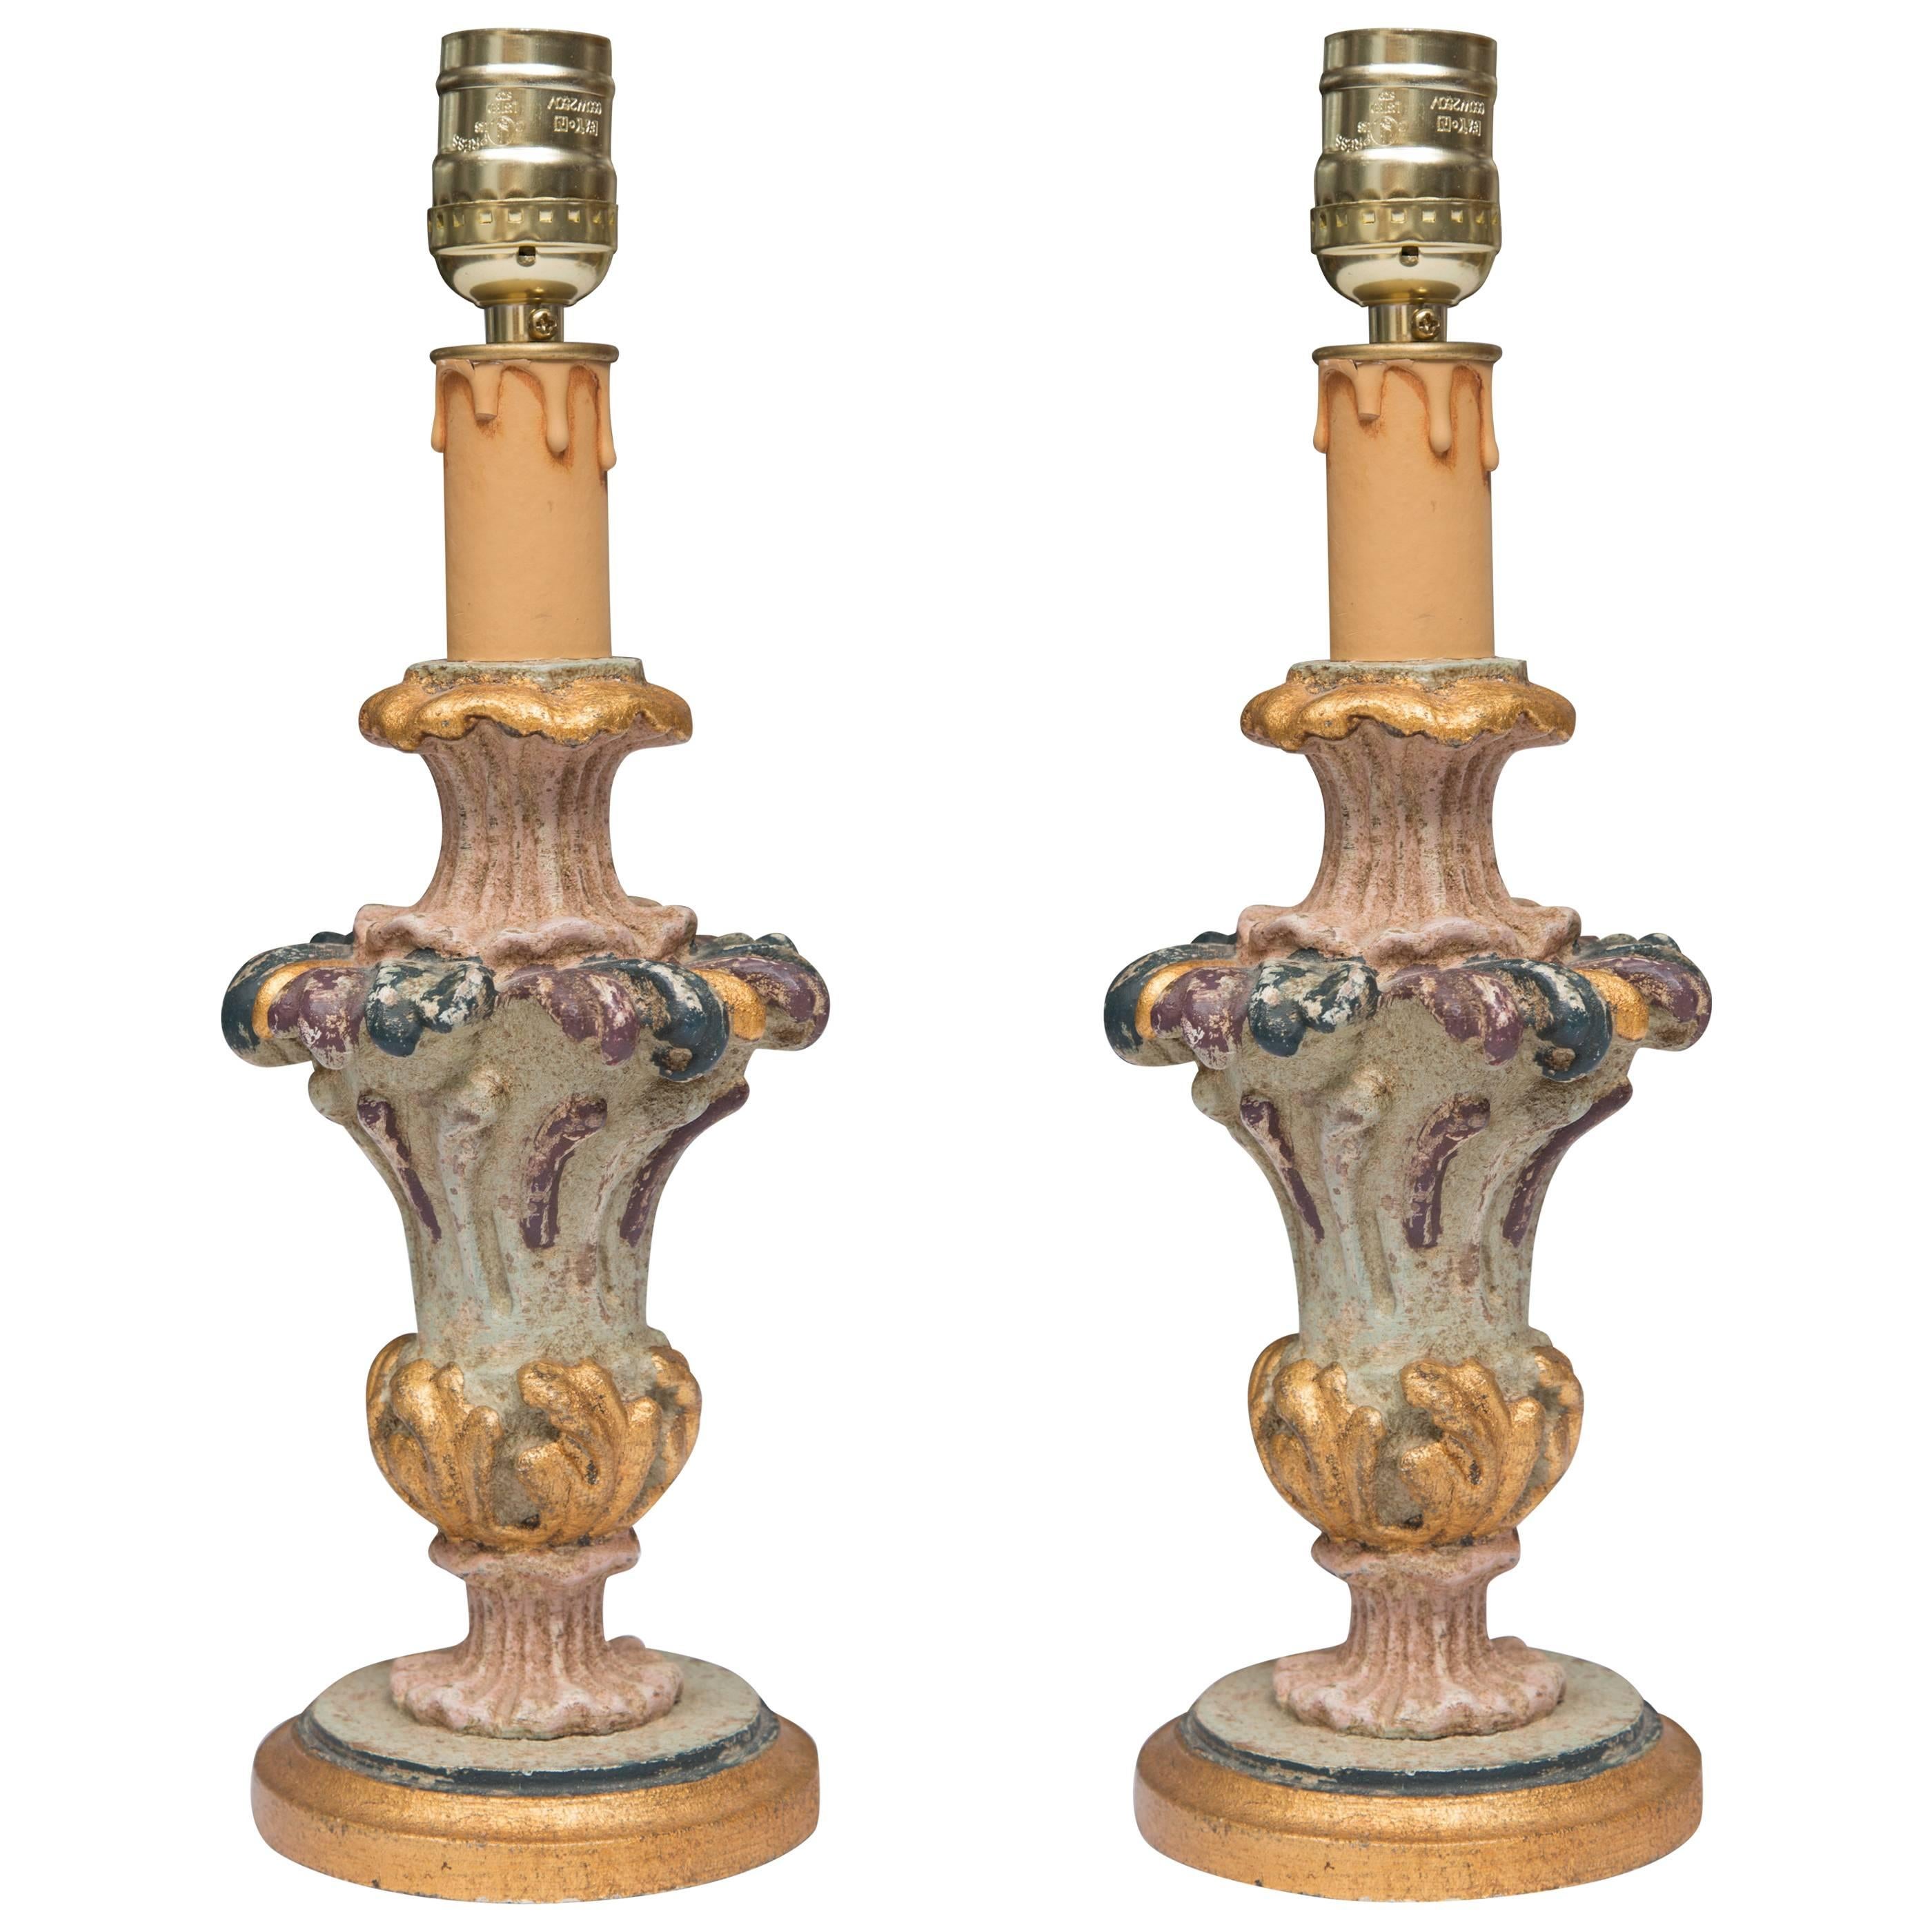 Hand-Painted and Parcel-Gilt Italian Candlesticks as Lamps